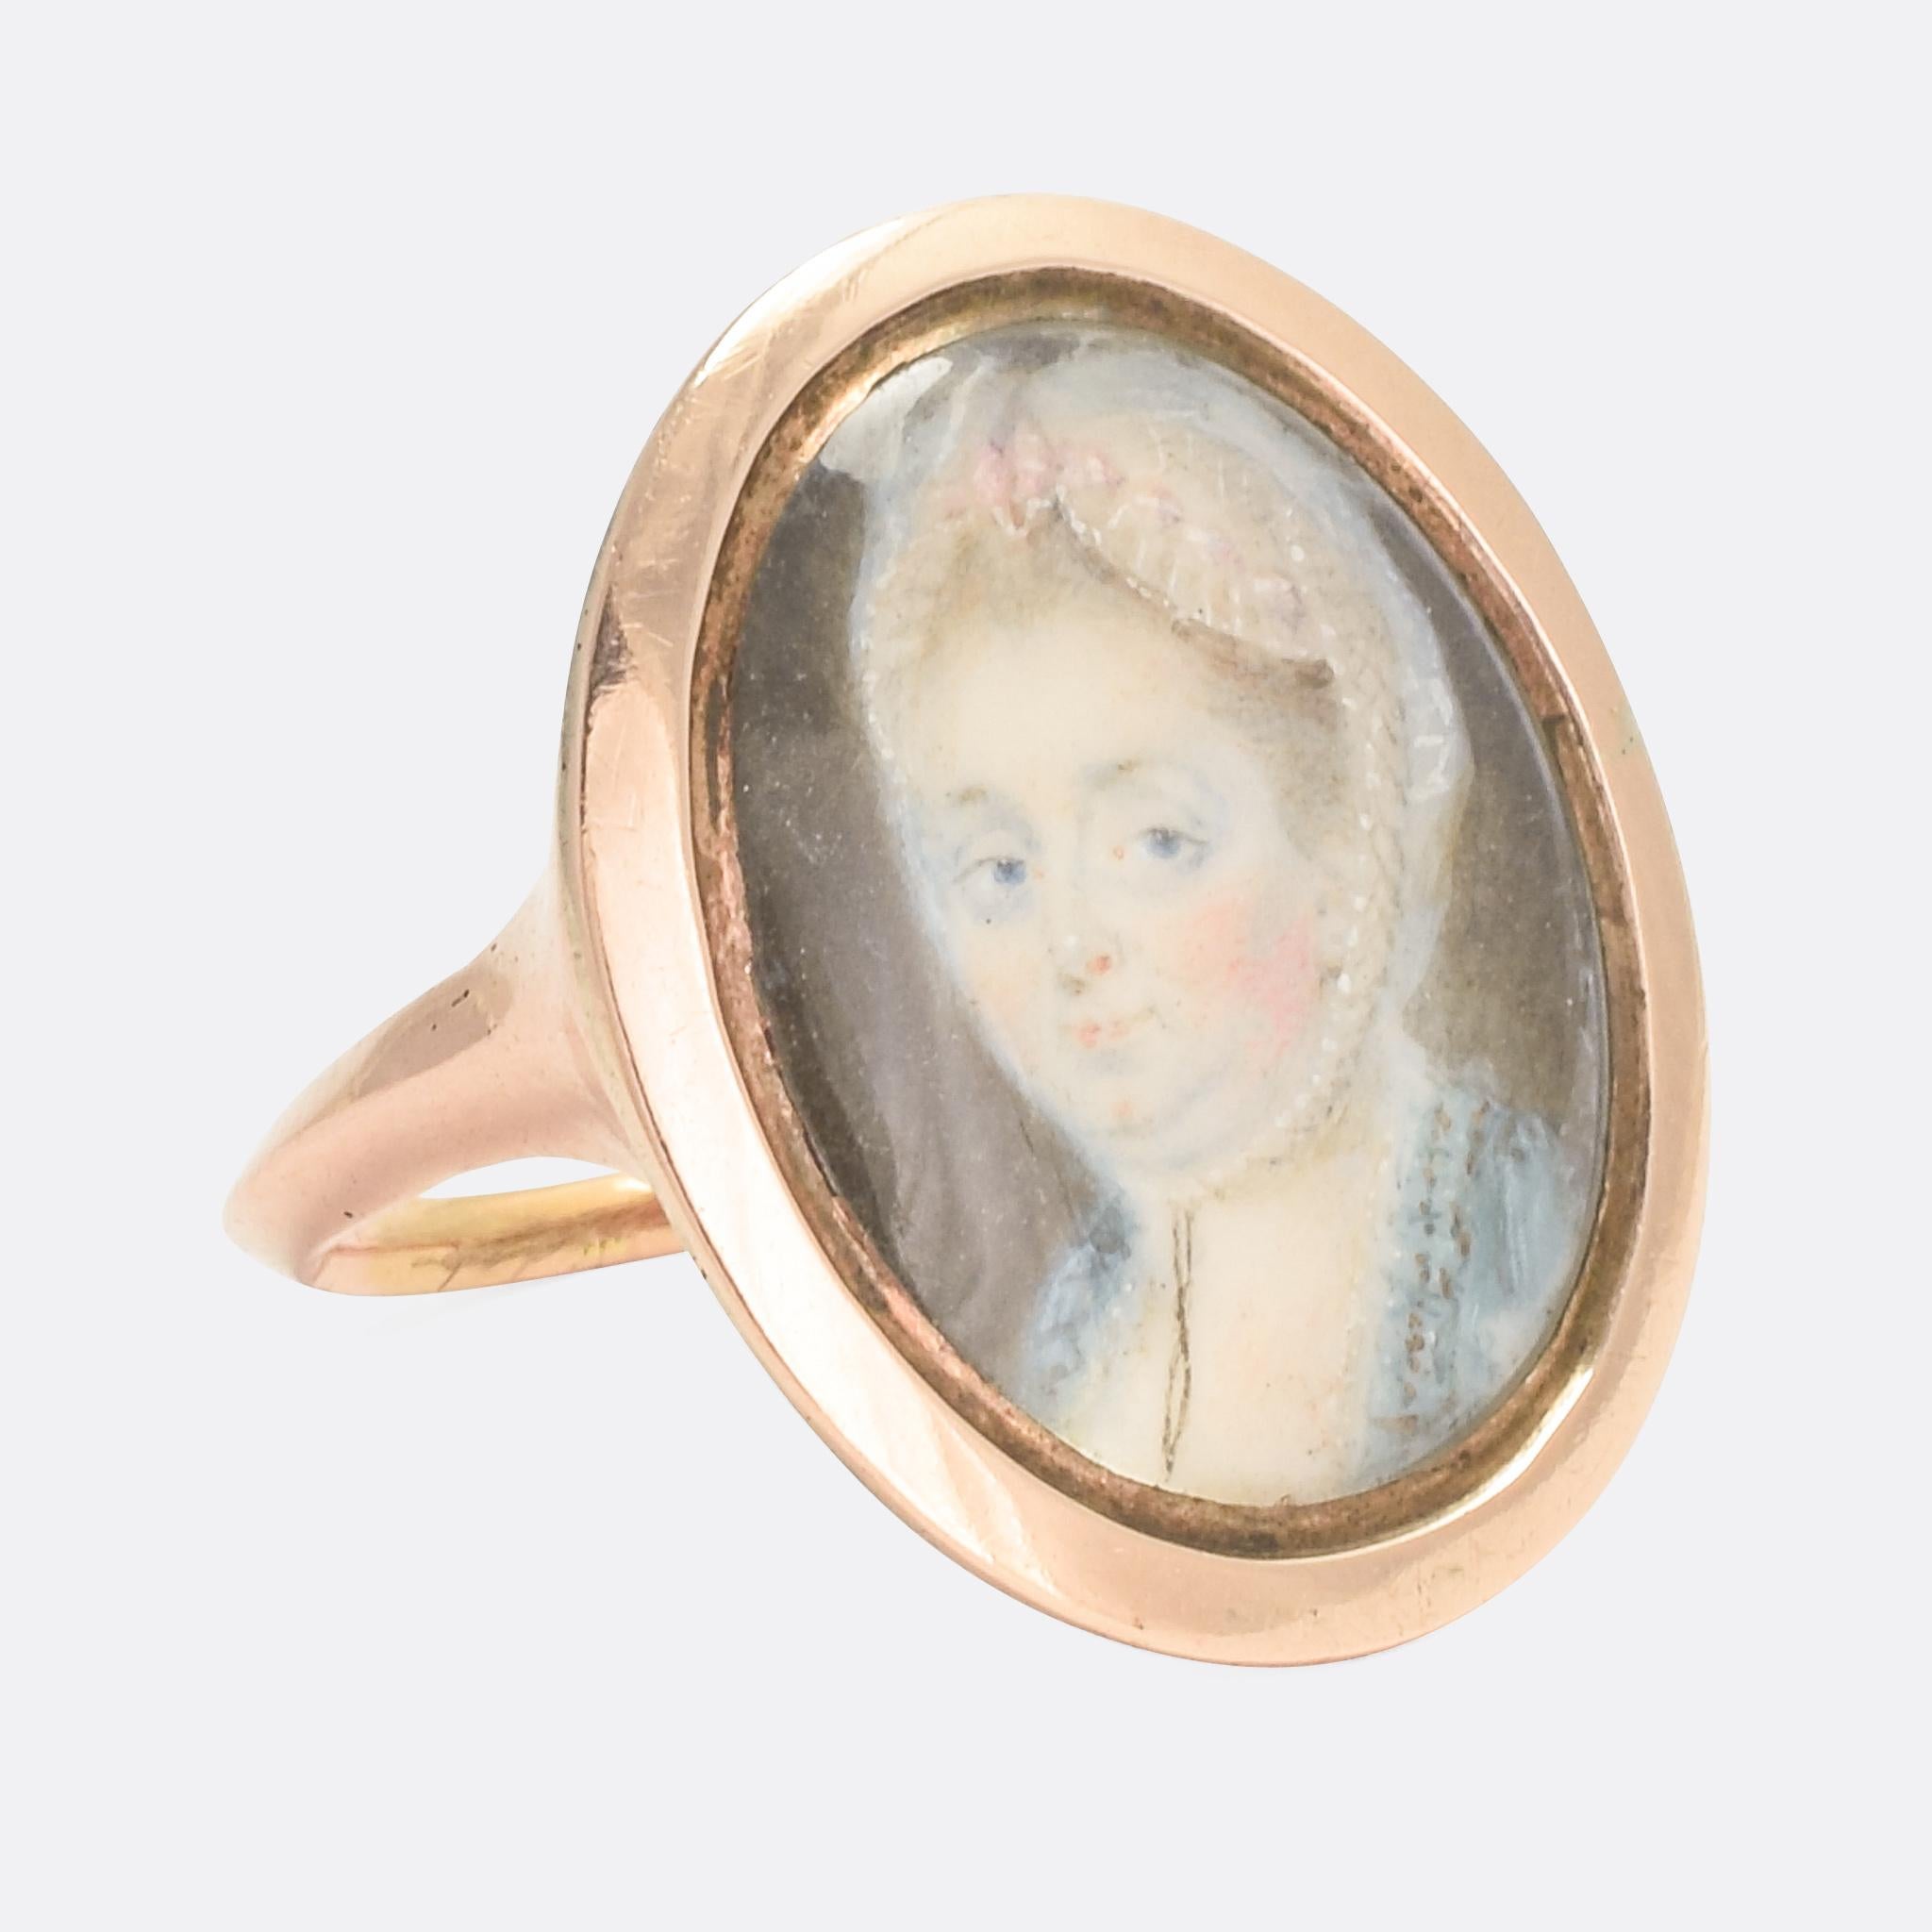 An 18th Century portrait ring depicting a lady wearing a turquoise coloured dress and lace bonnet. It dates from circa 1760; the detail to the miniature painting is wonderful, especially to her face and bonnet. Modelled in 15 karat rose gold, it